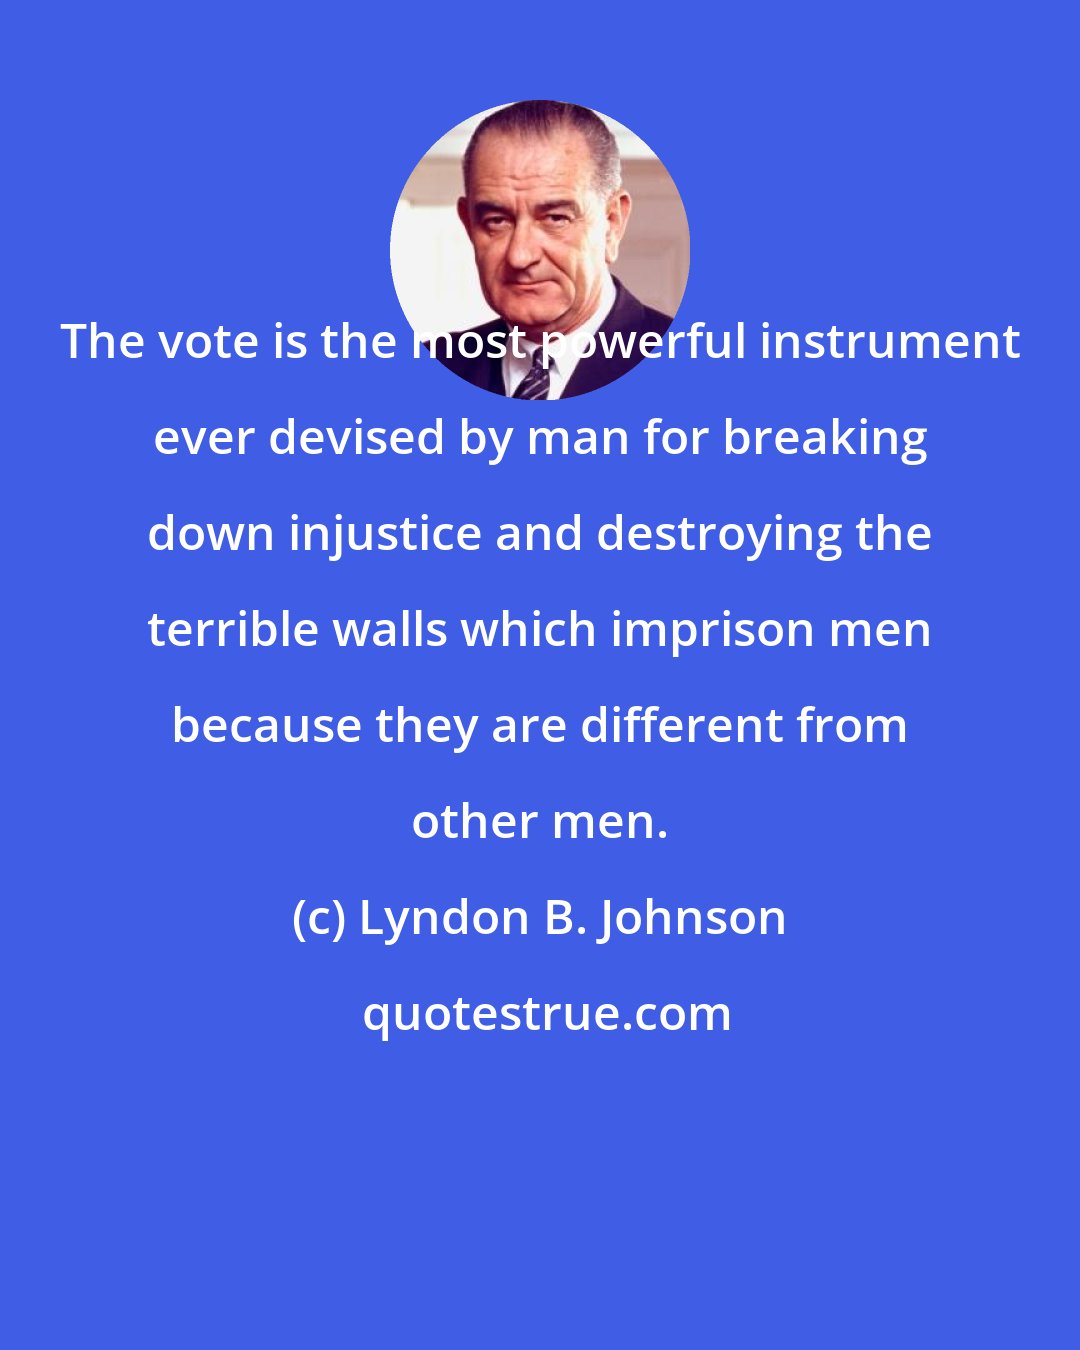 Lyndon B. Johnson: The vote is the most powerful instrument ever devised by man for breaking down injustice and destroying the terrible walls which imprison men because they are different from other men.